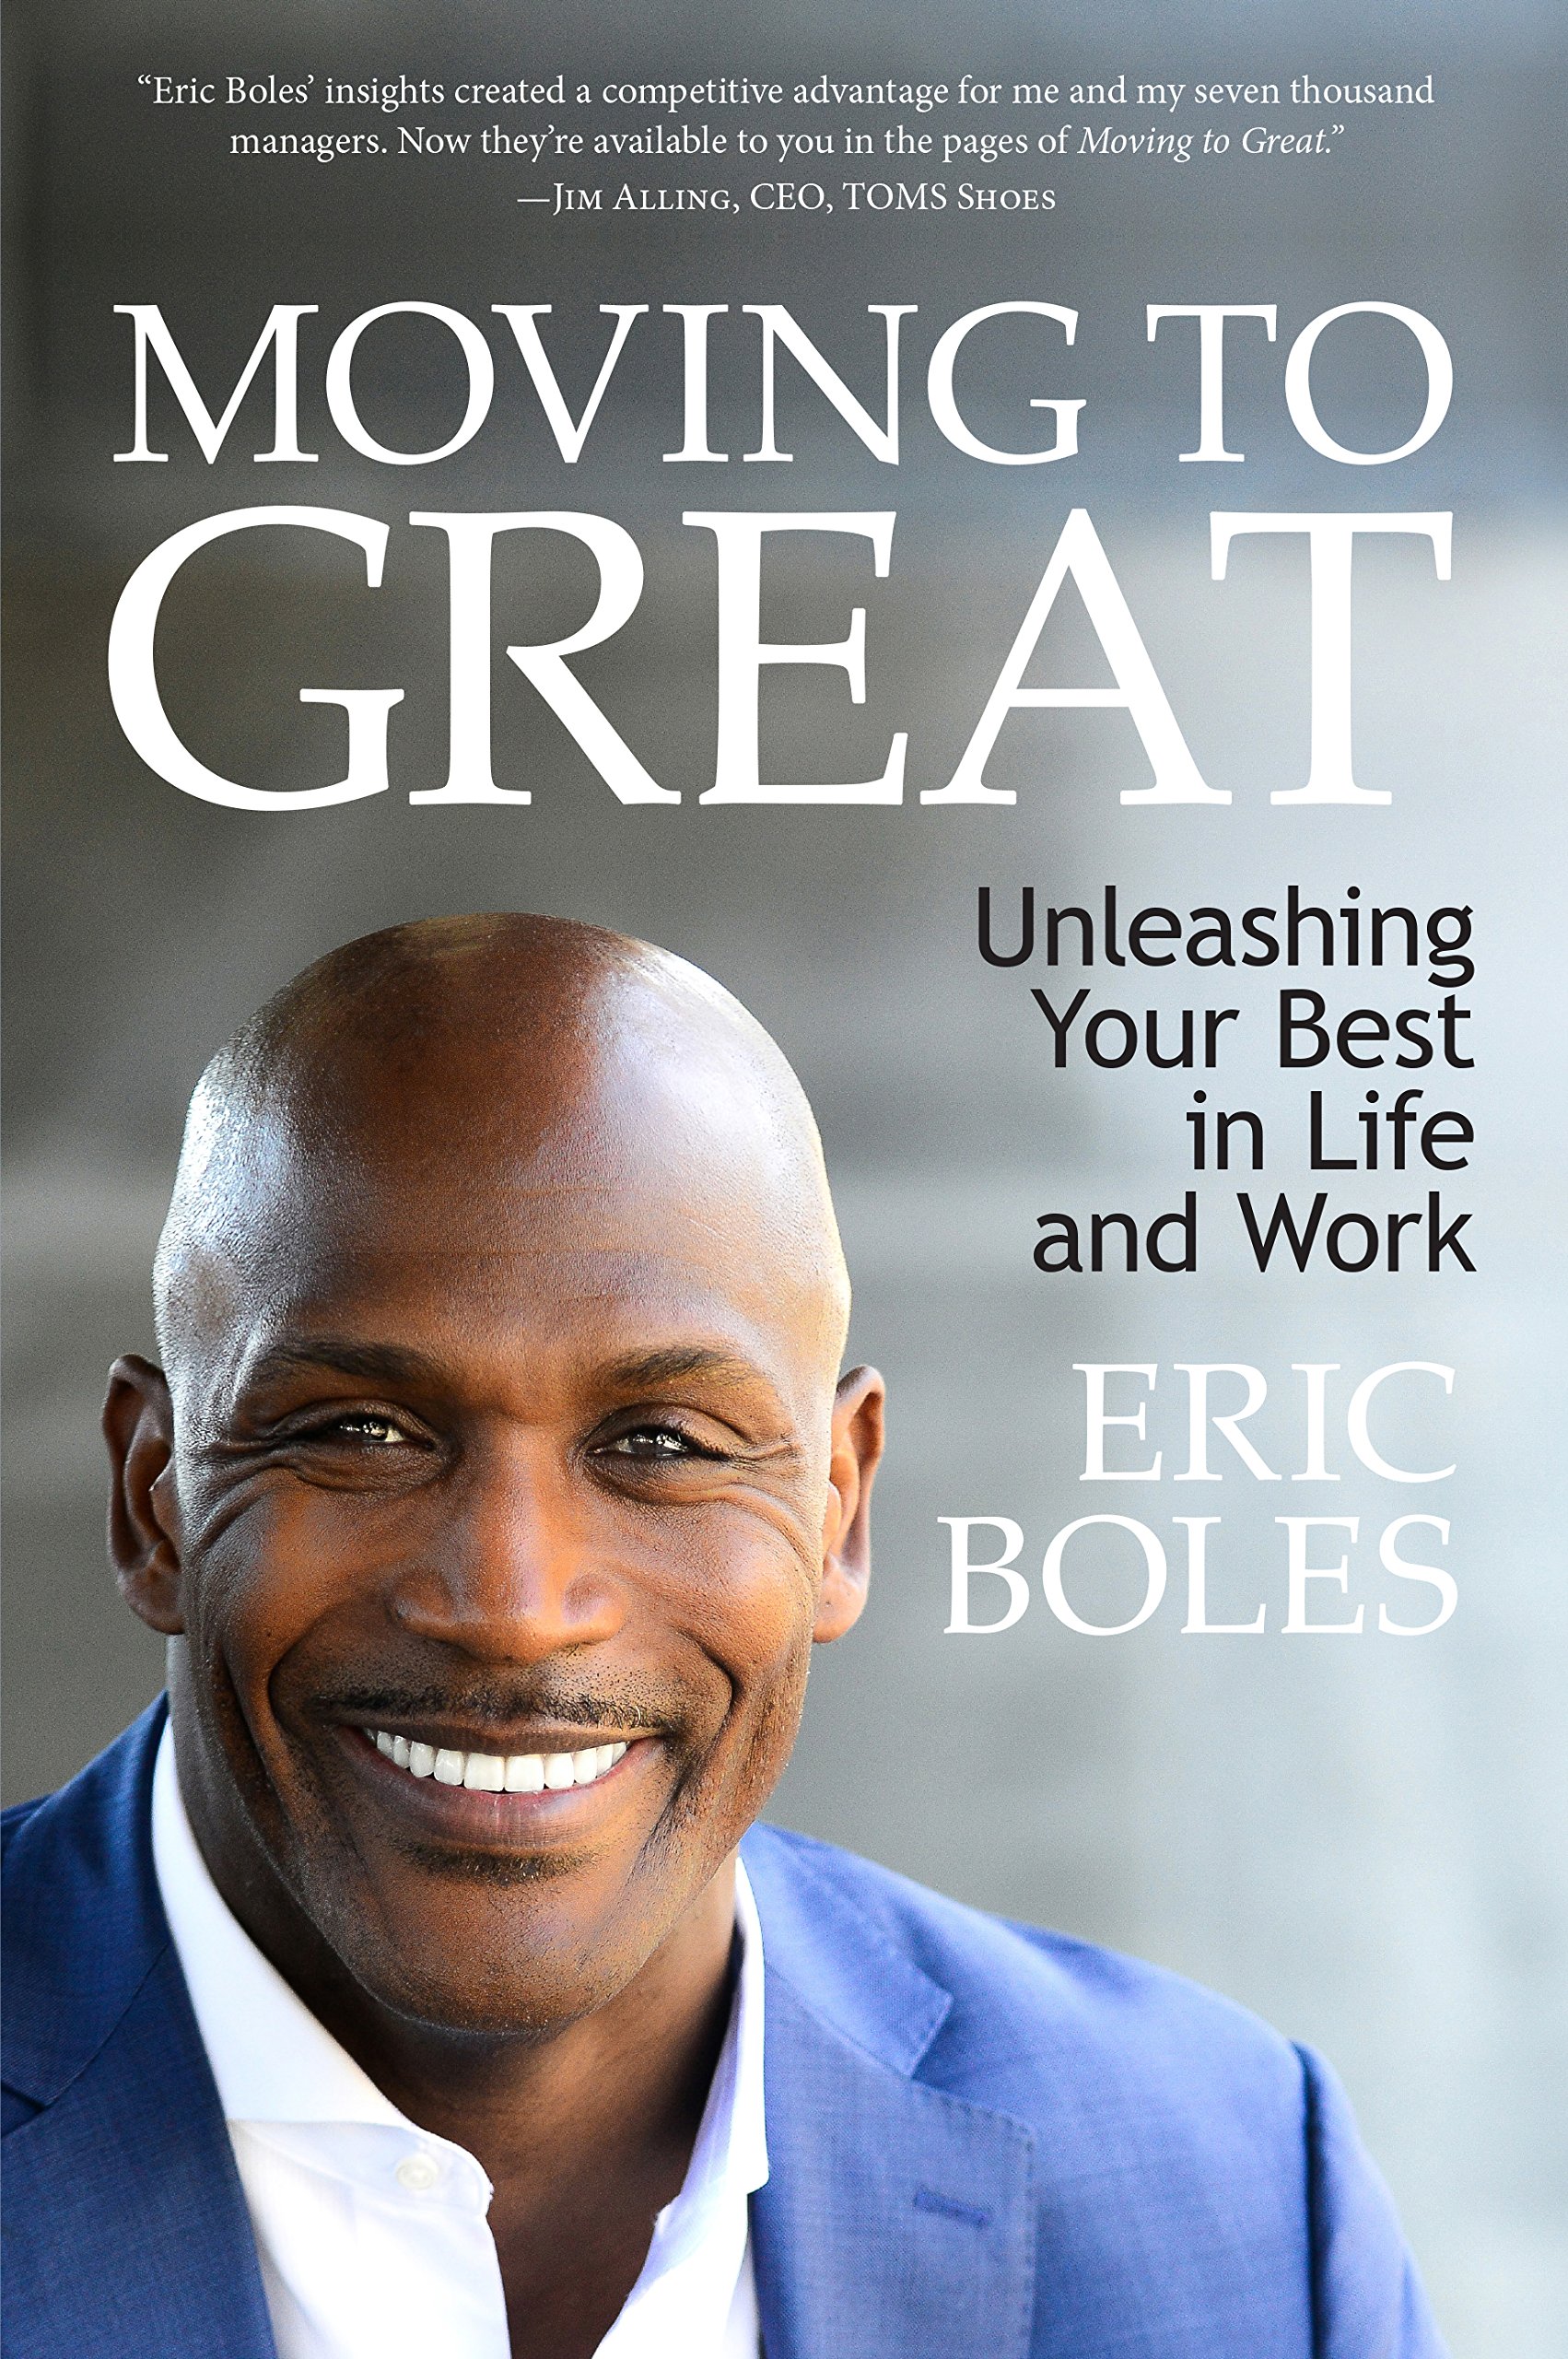 Book 1792 597 moving to great: unleashing your best in life and work